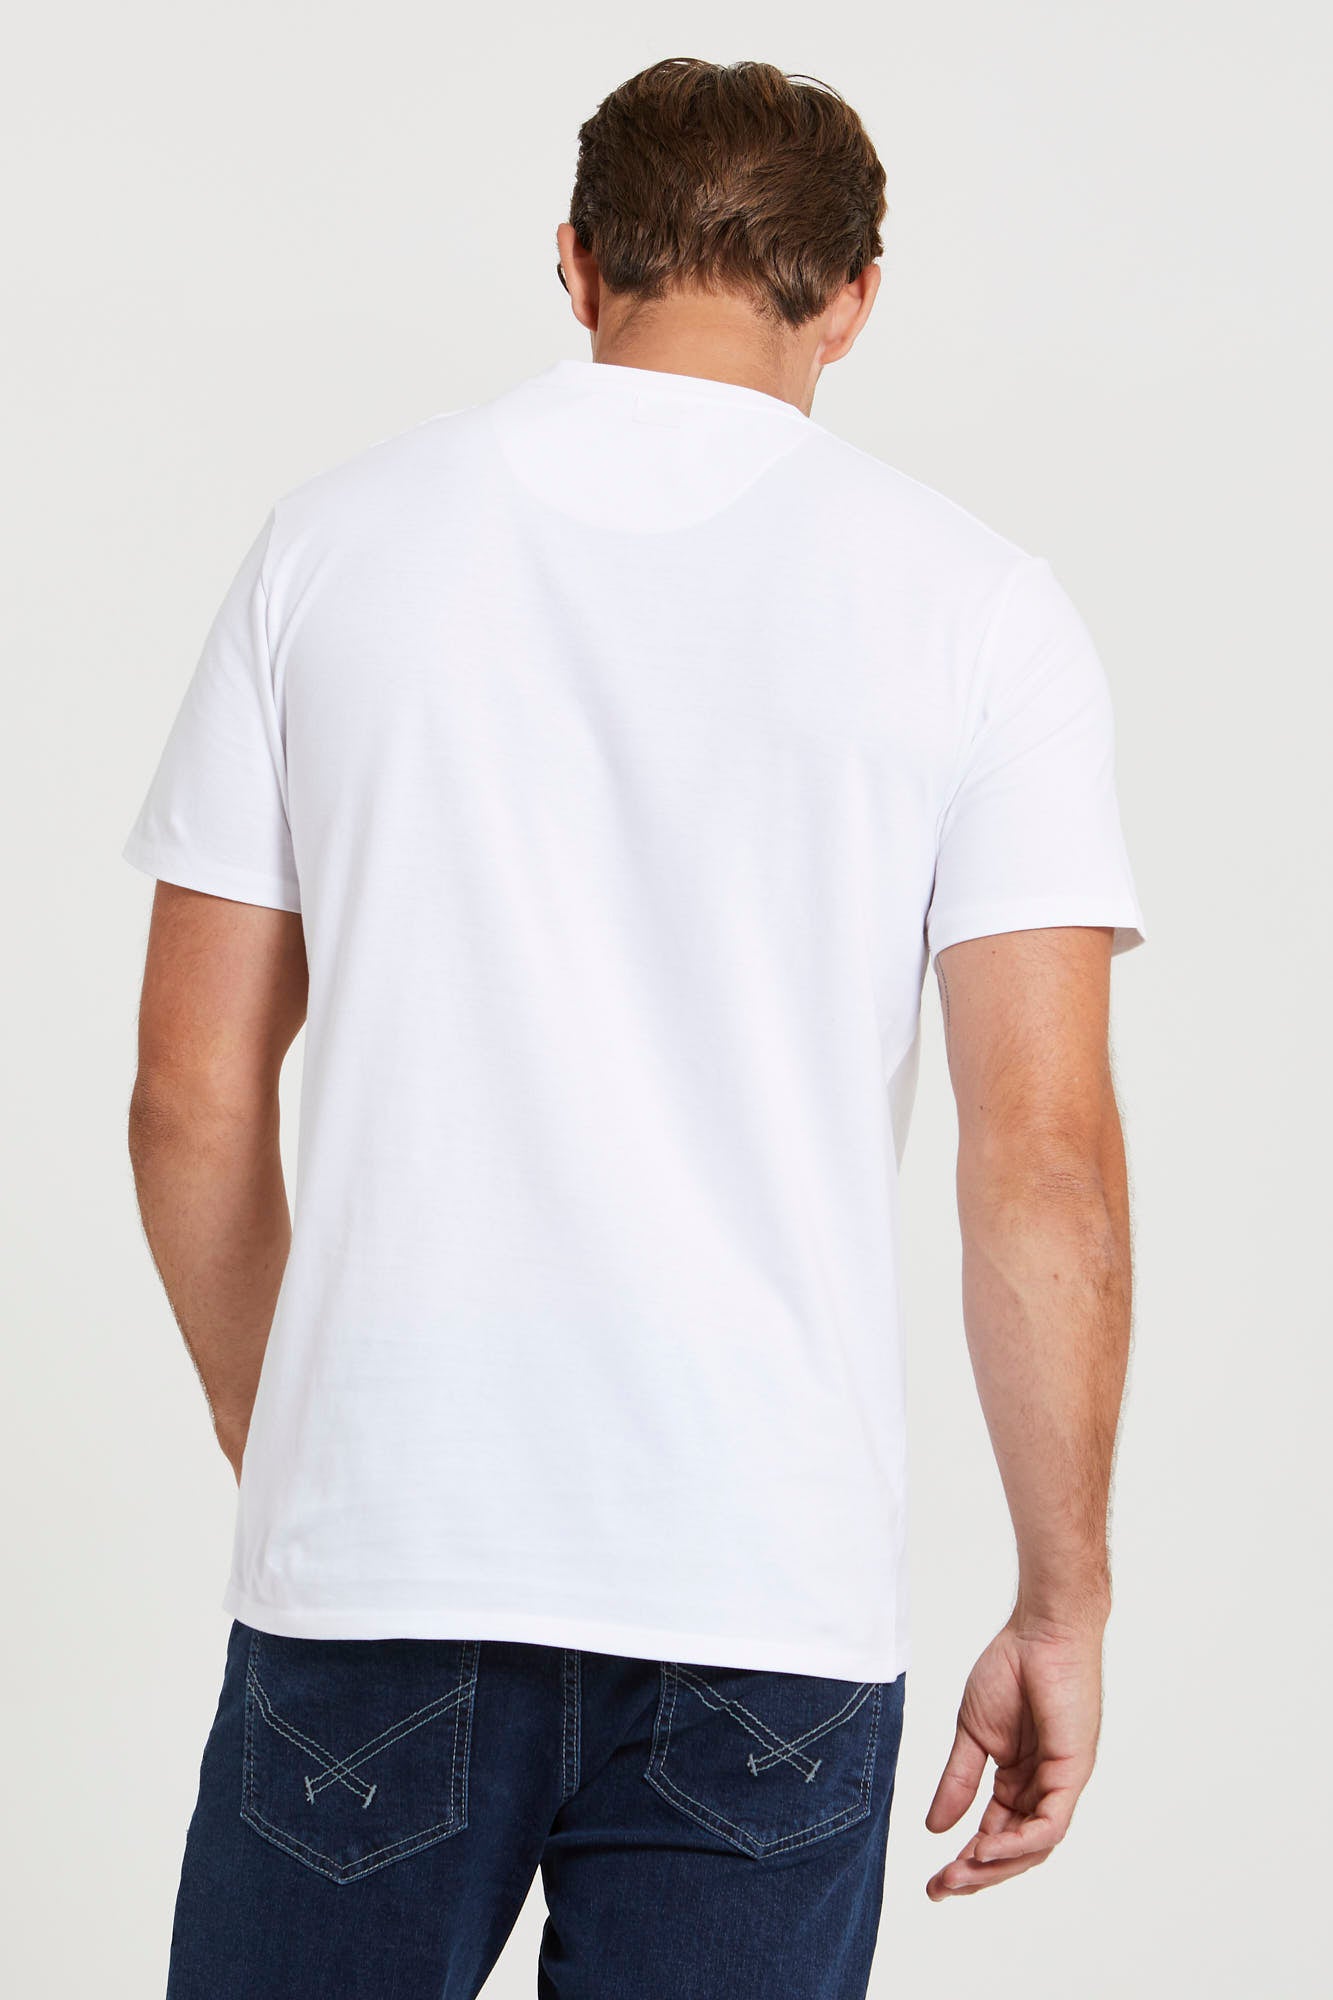 Mens Graphic T-Shirt in Bright White